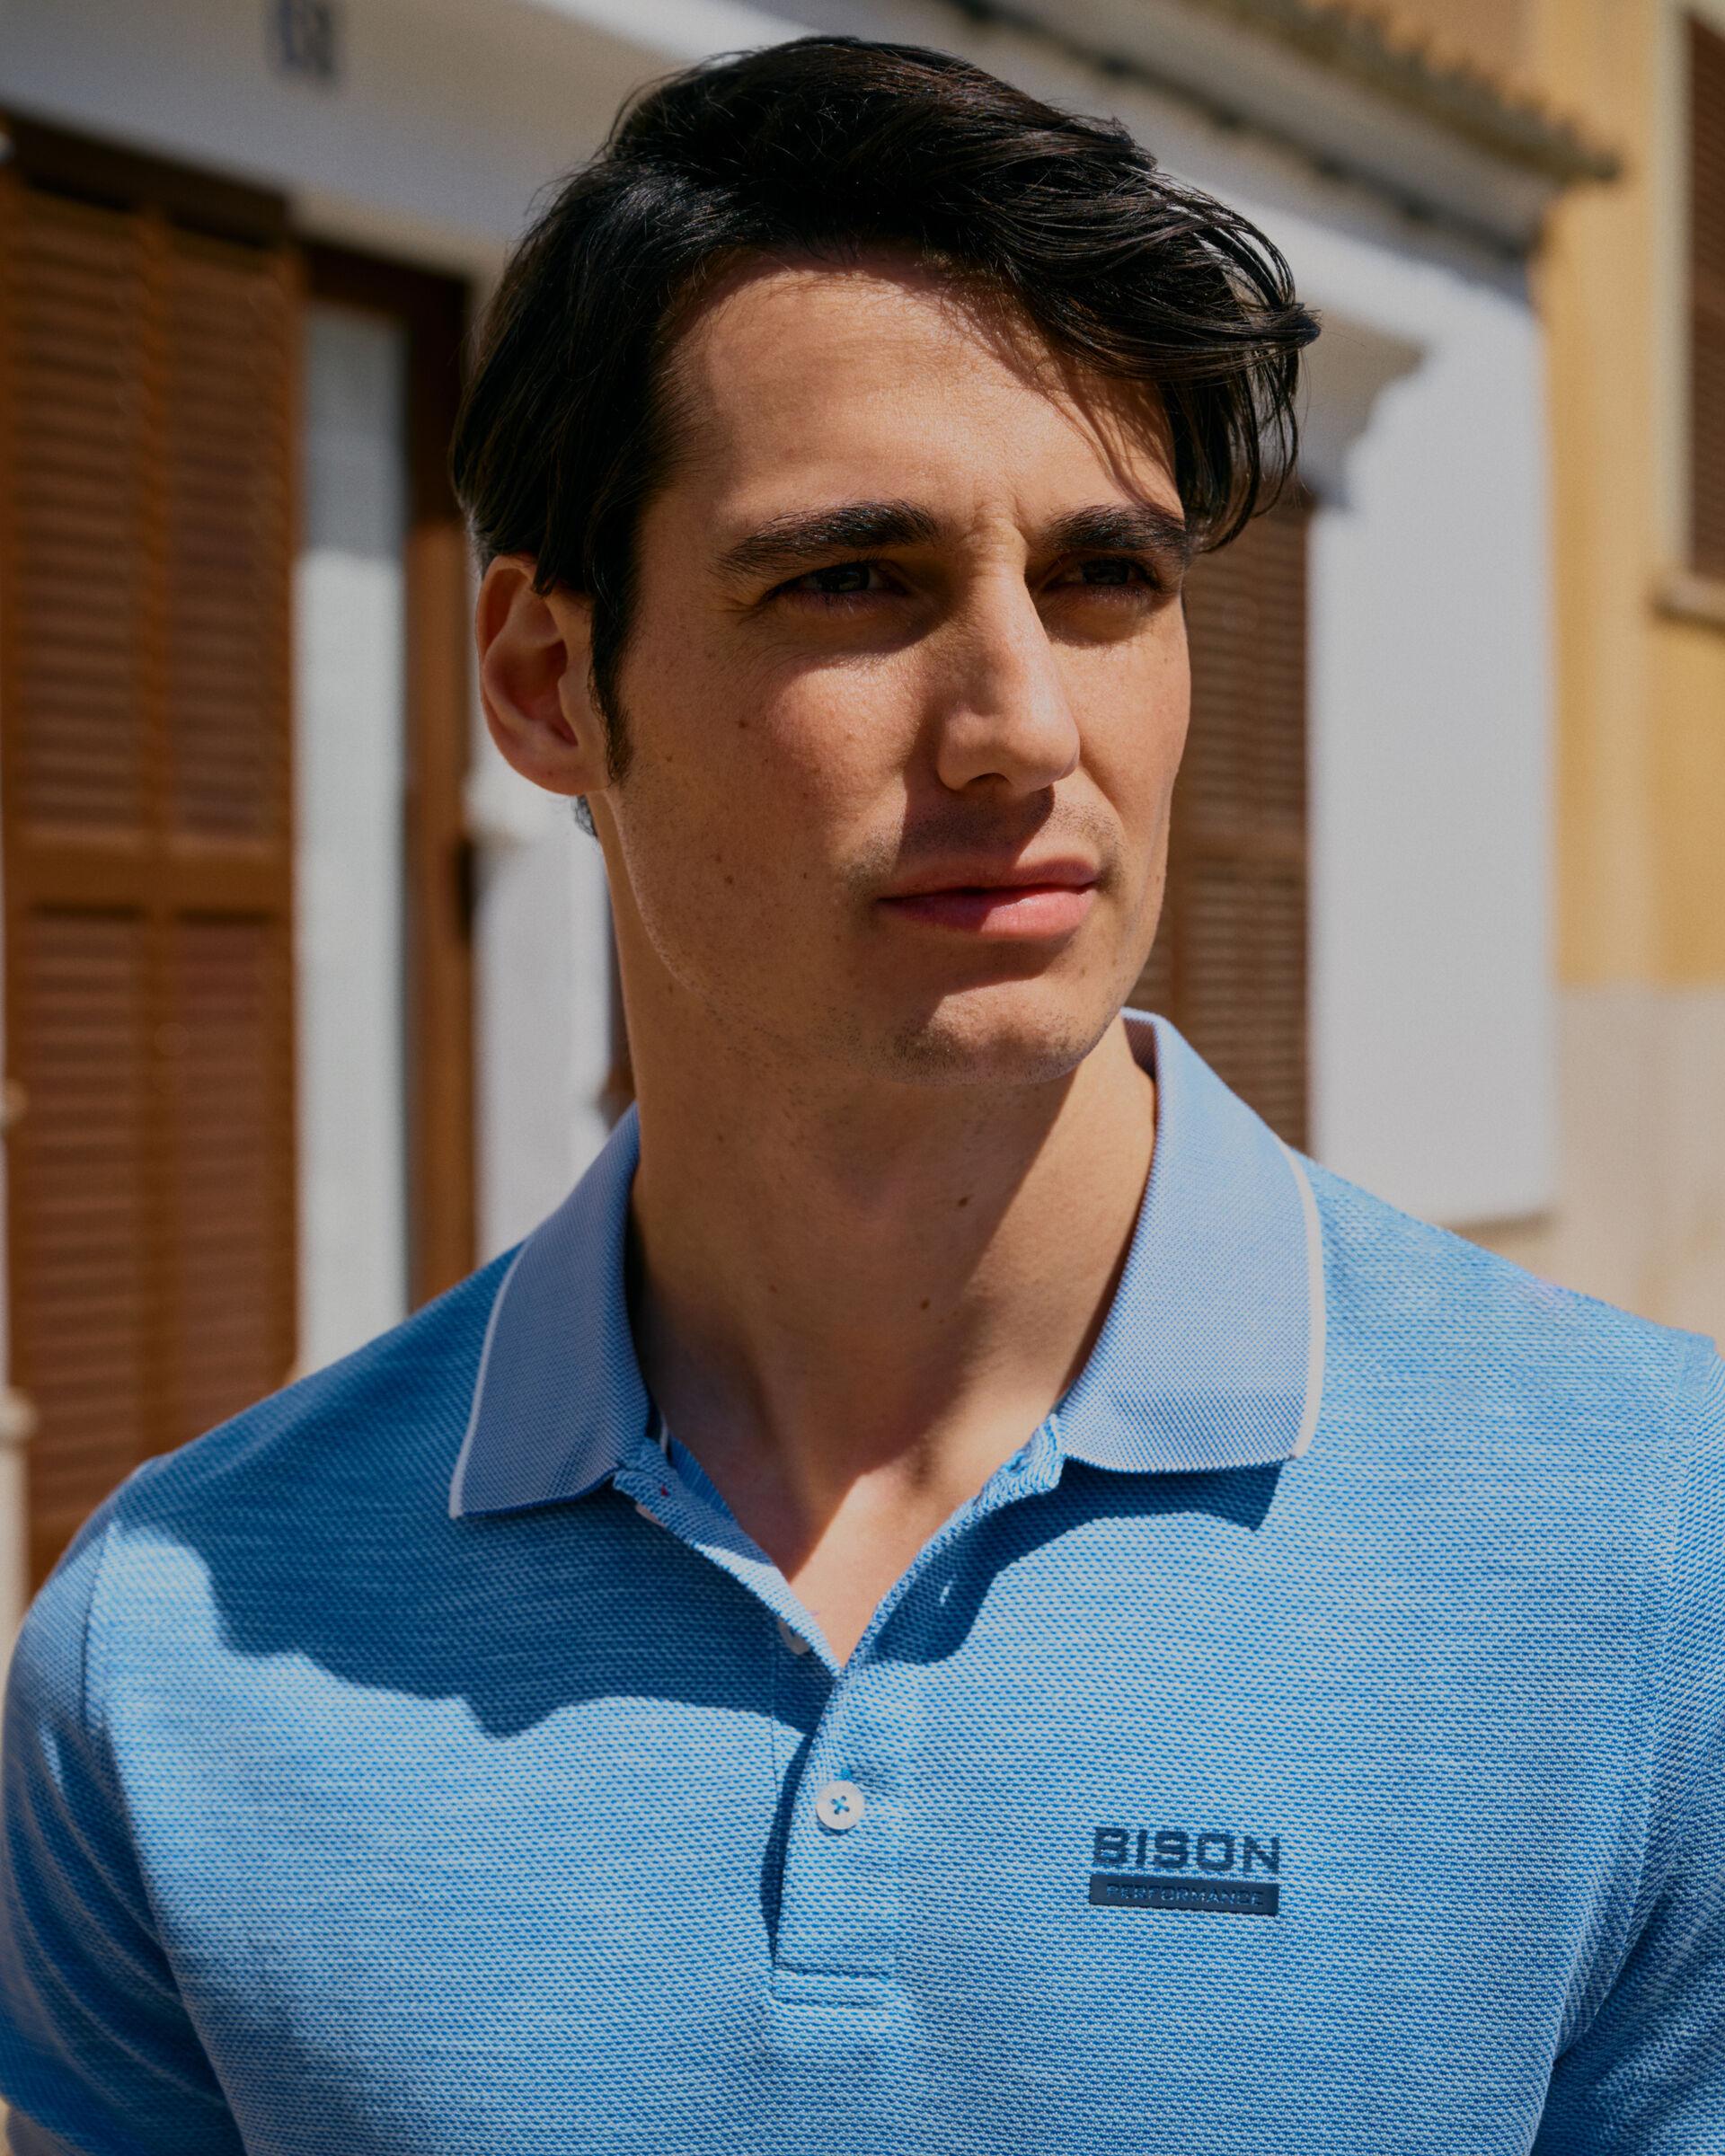 Bison Fast Dry Polo